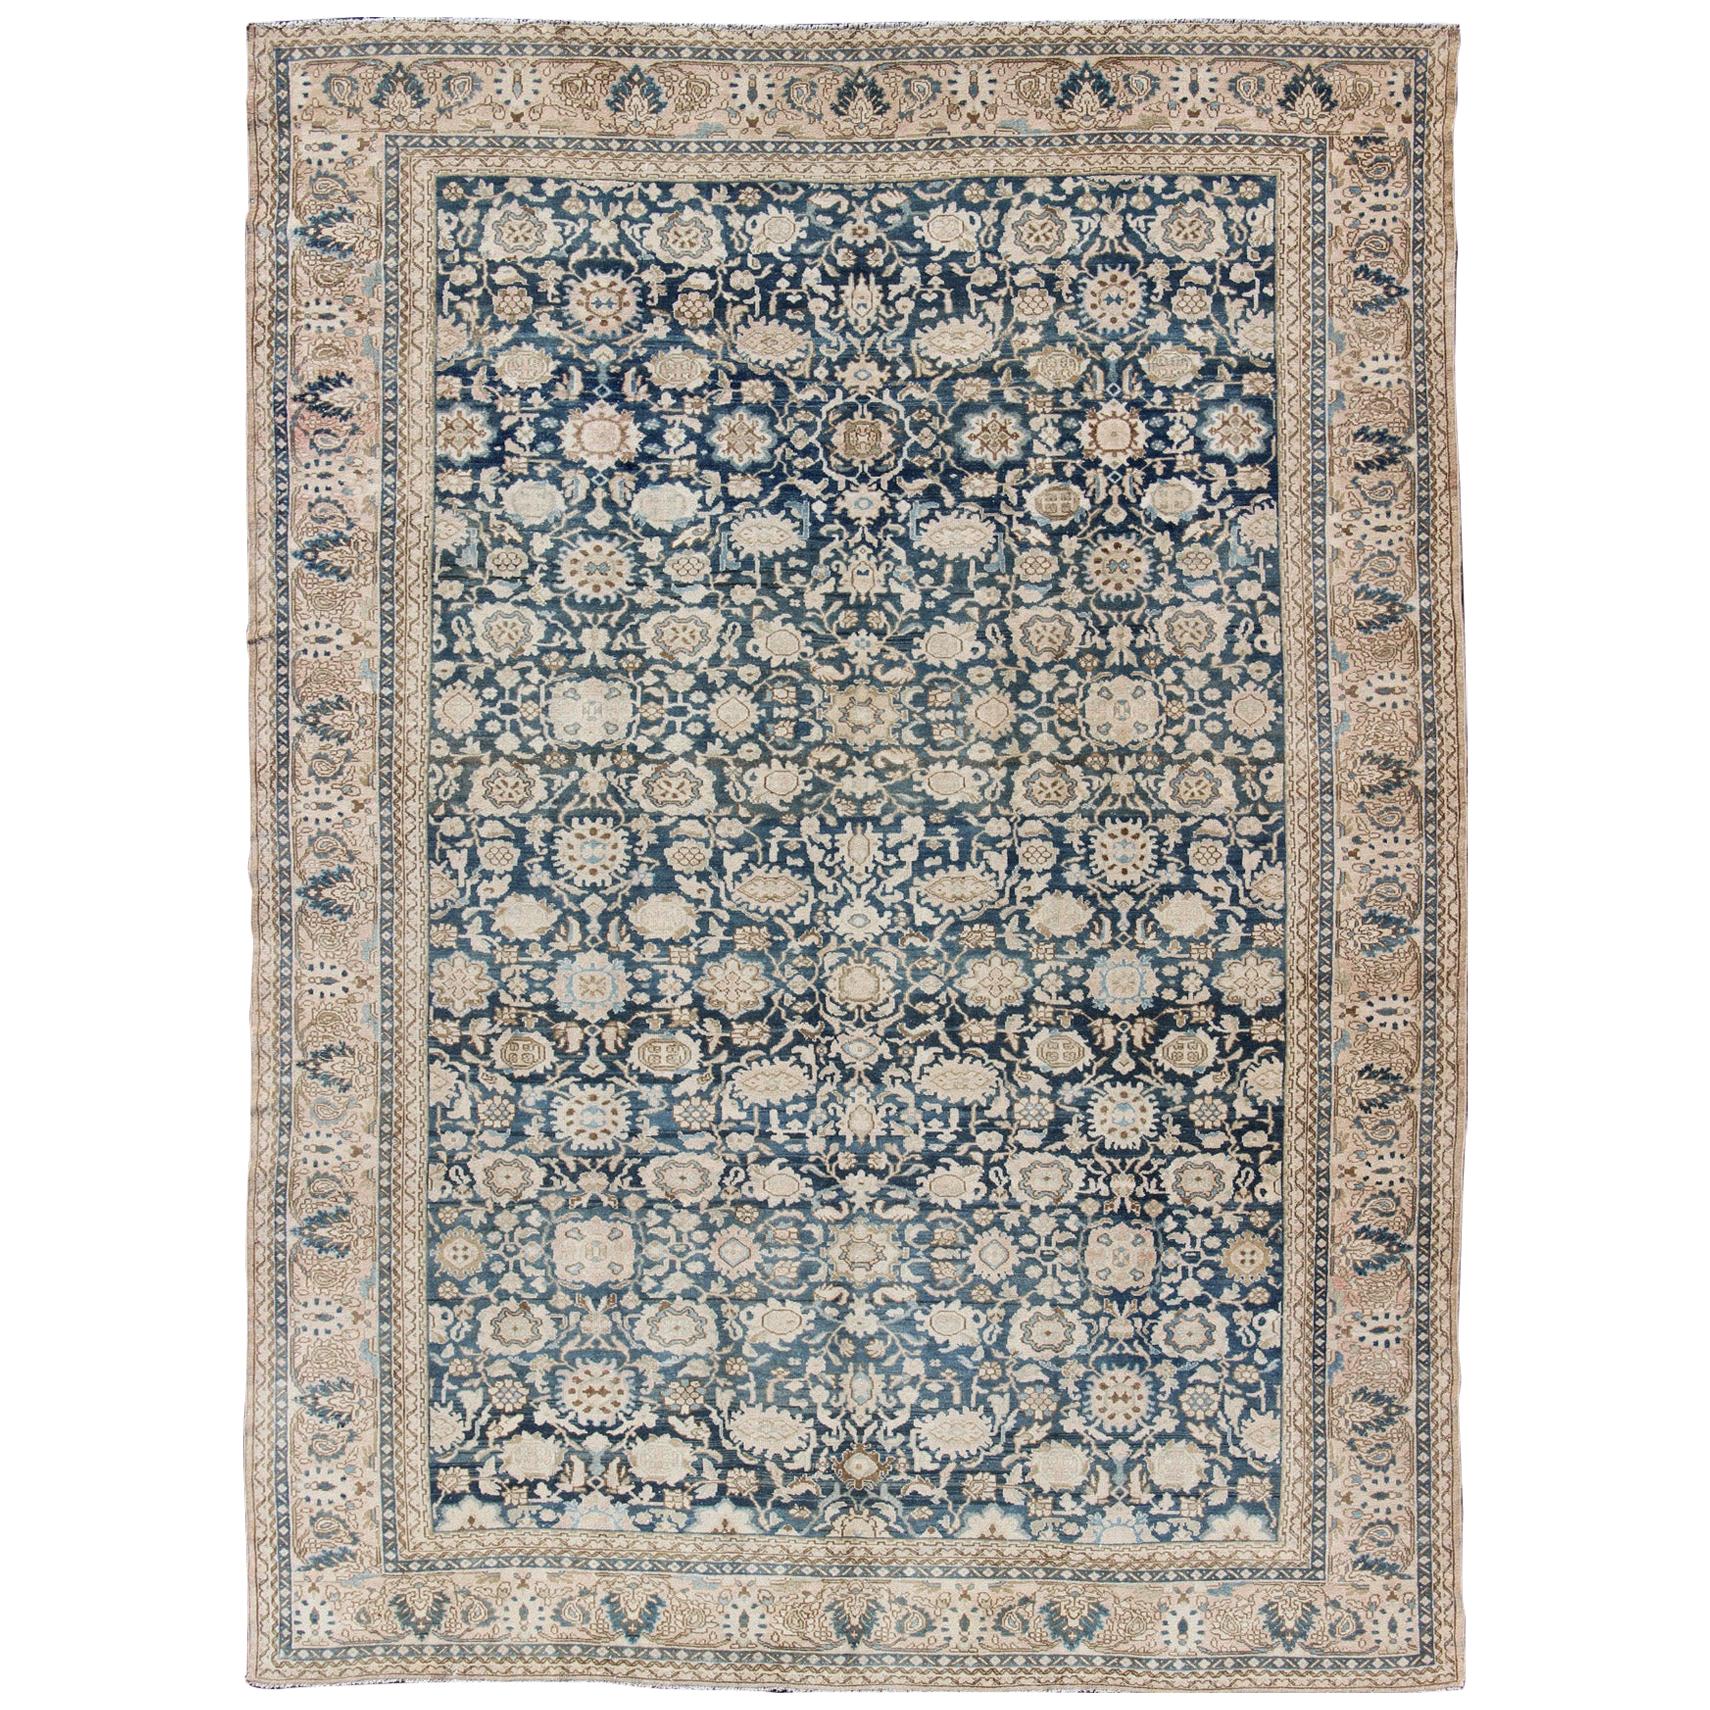 All-Over Blue Floral Persian Hamadan Rug in Navy Blue and Earthy Tones For Sale